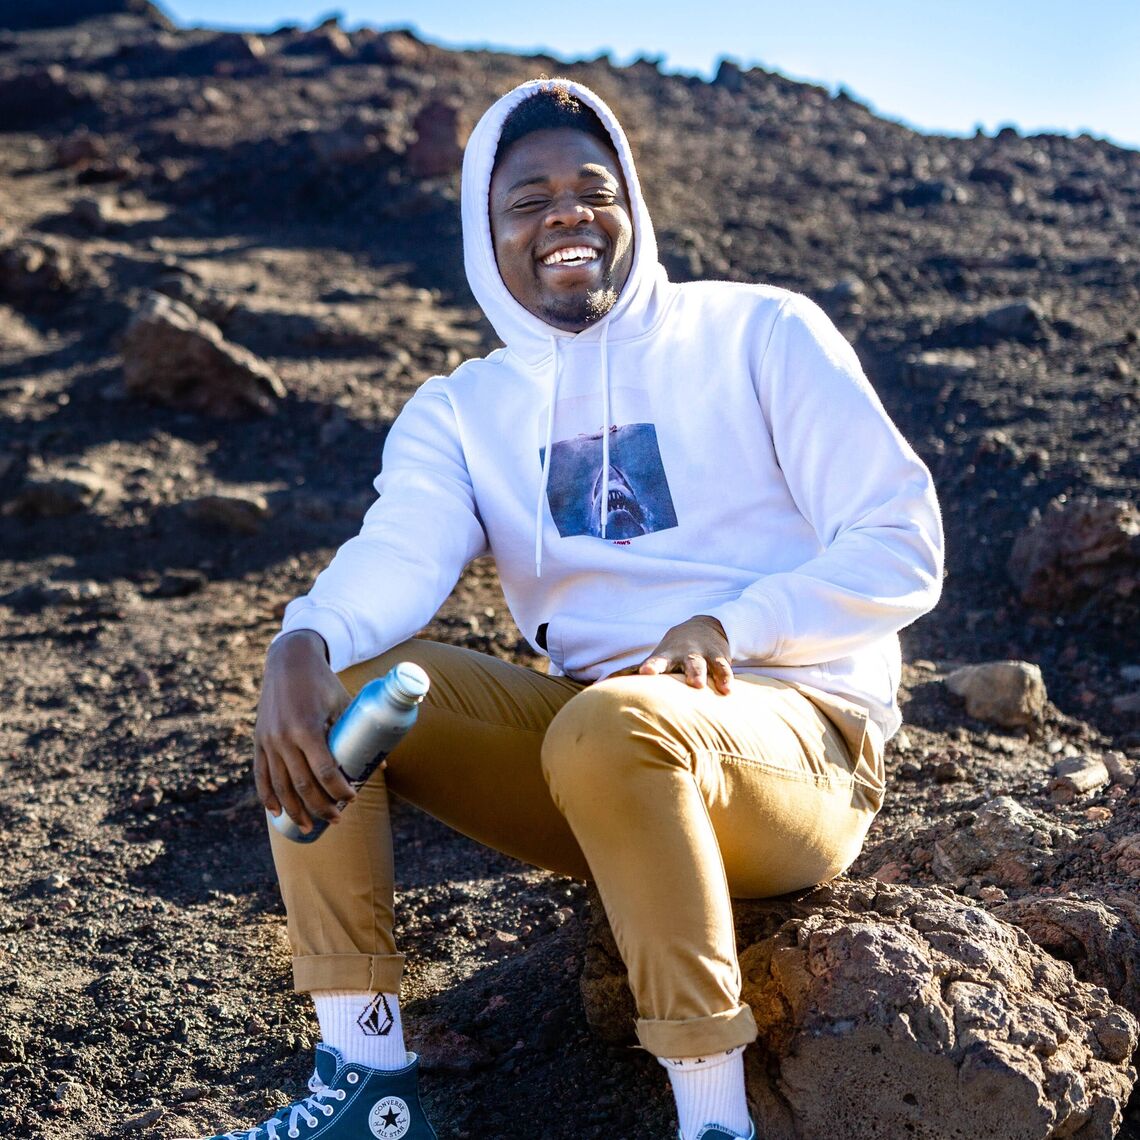 Ojima Abraham in Hawaii, where he traveled with Assistant Professor of Physics Ryan Trainor for his research related to the James Webb Space Telescope (JWST), recently launched into space, and Hawaii’s W. M. Keck Observatory.